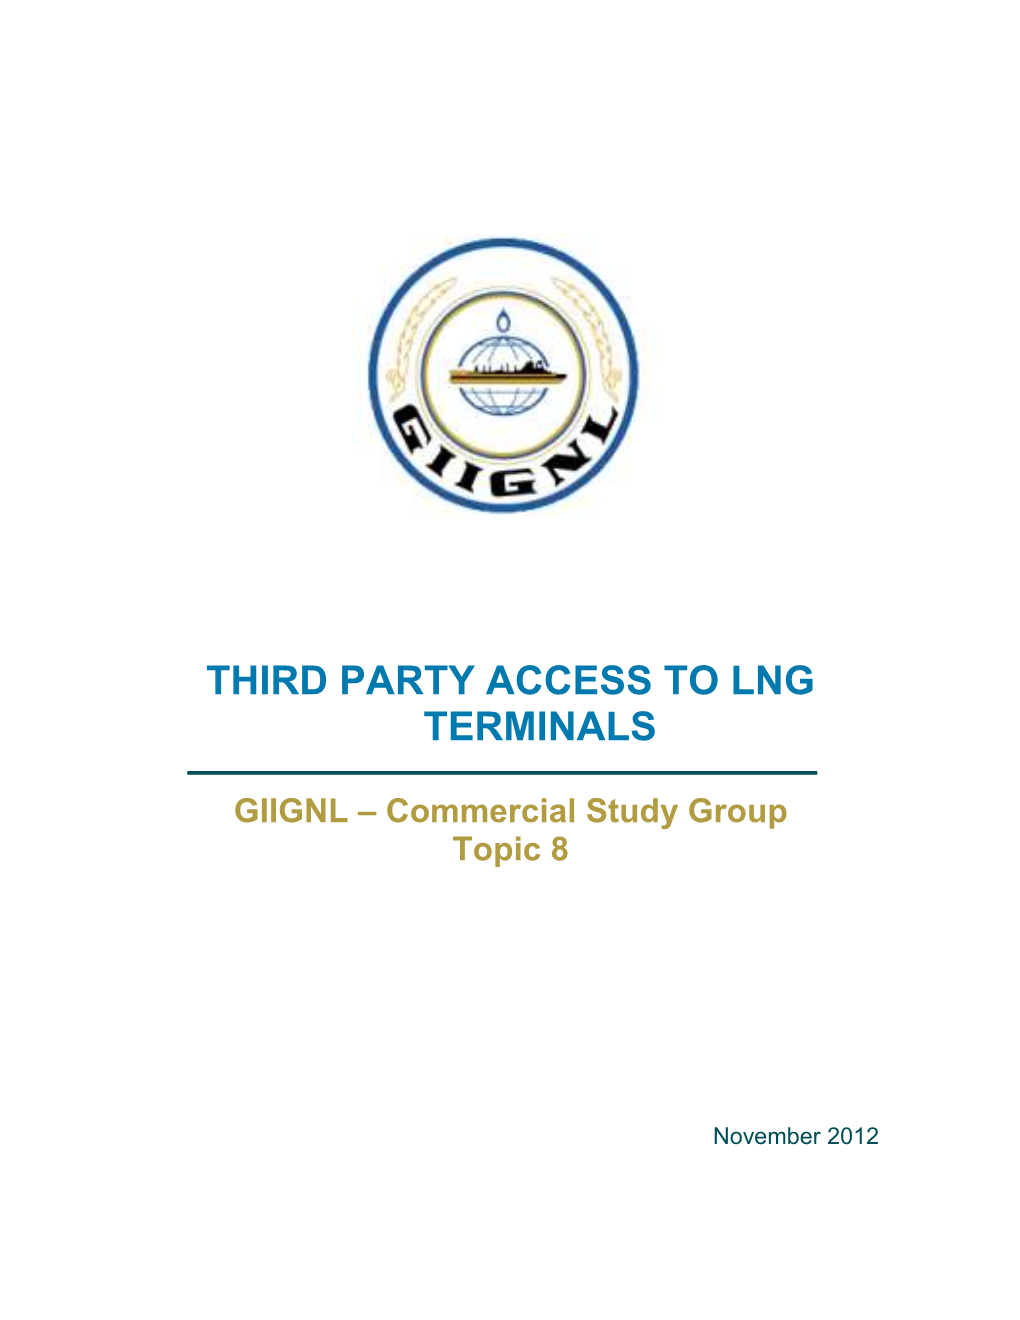 Third Party Access to Lng Terminals